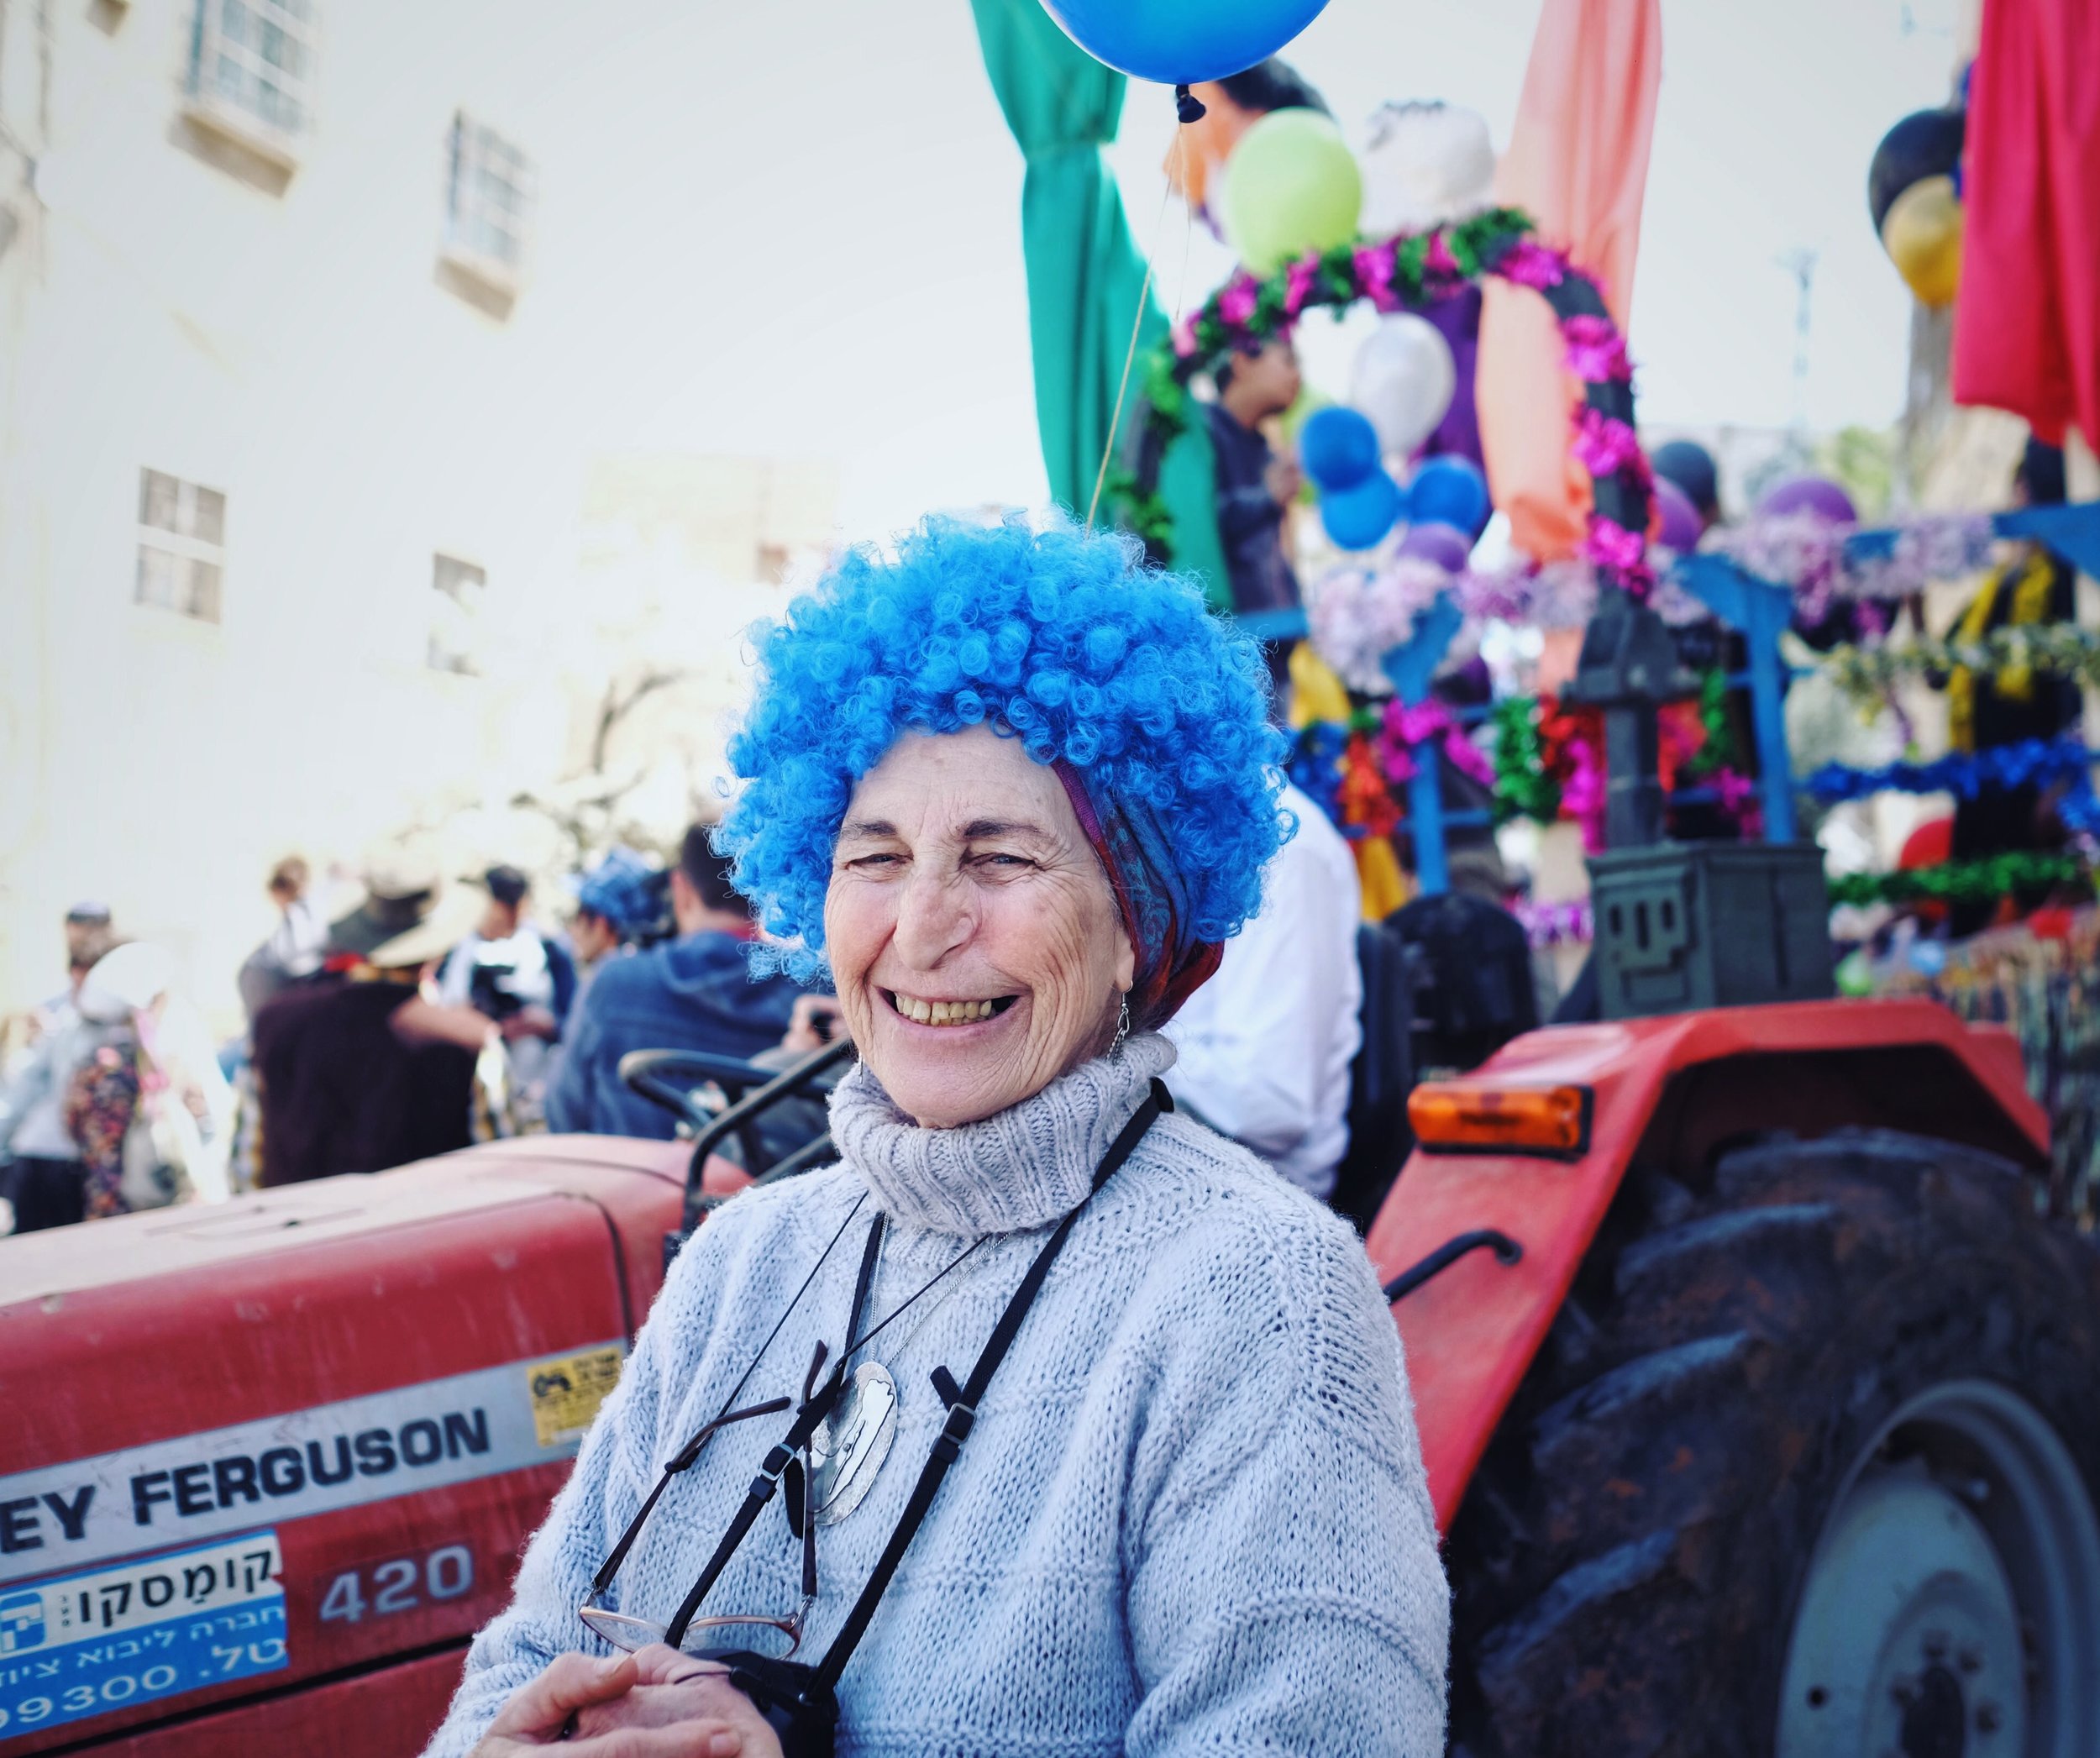  Tamar Halfon from South Carolina celebrates Purim in the West Bank city of Hebron.&nbsp;I asked about the camera around her neck. "If they throw a stone, now I'll be able to know who it was" she said.&nbsp; 